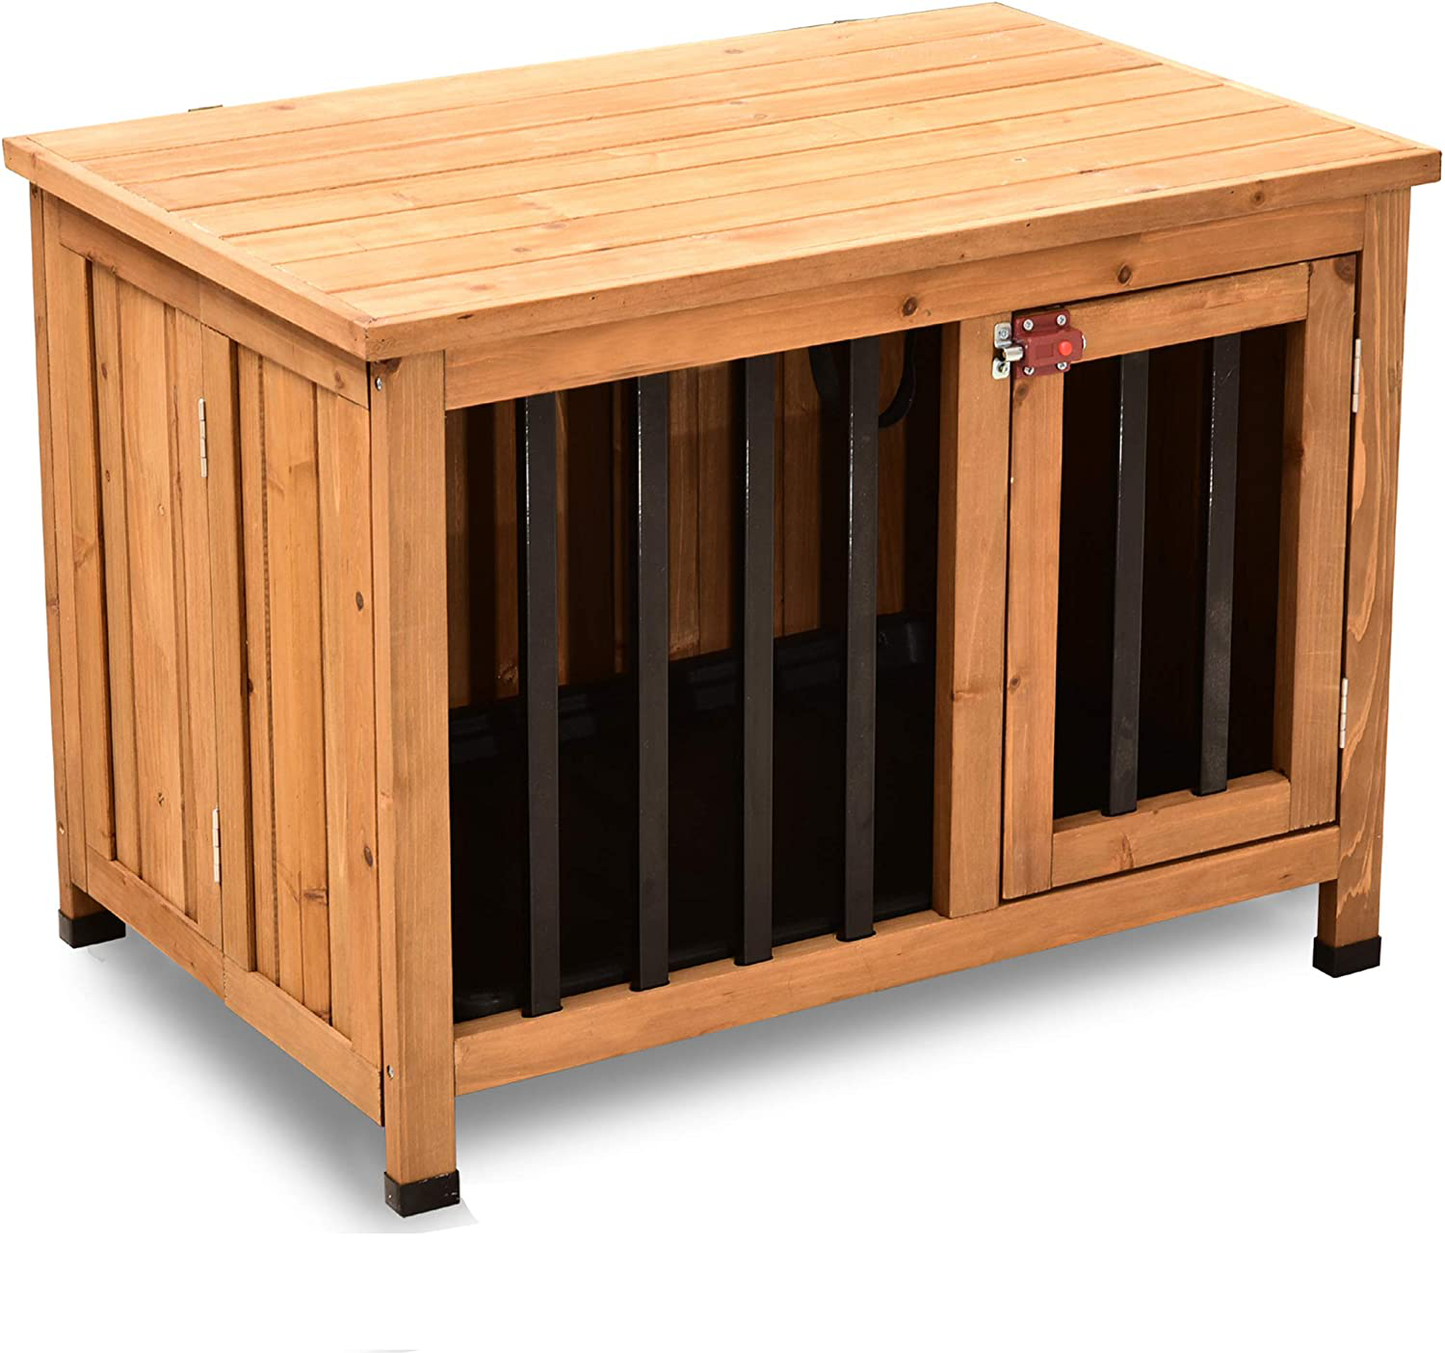 Lovupet Wooden Portable Foldable Pet Crate Indoor Outdoor Dog Kennel Pet Cage with Tray Animals & Pet Supplies > Pet Supplies > Dog Supplies > Dog Houses Lovupet 28.1"L x 18.5"W x 20.5"H  